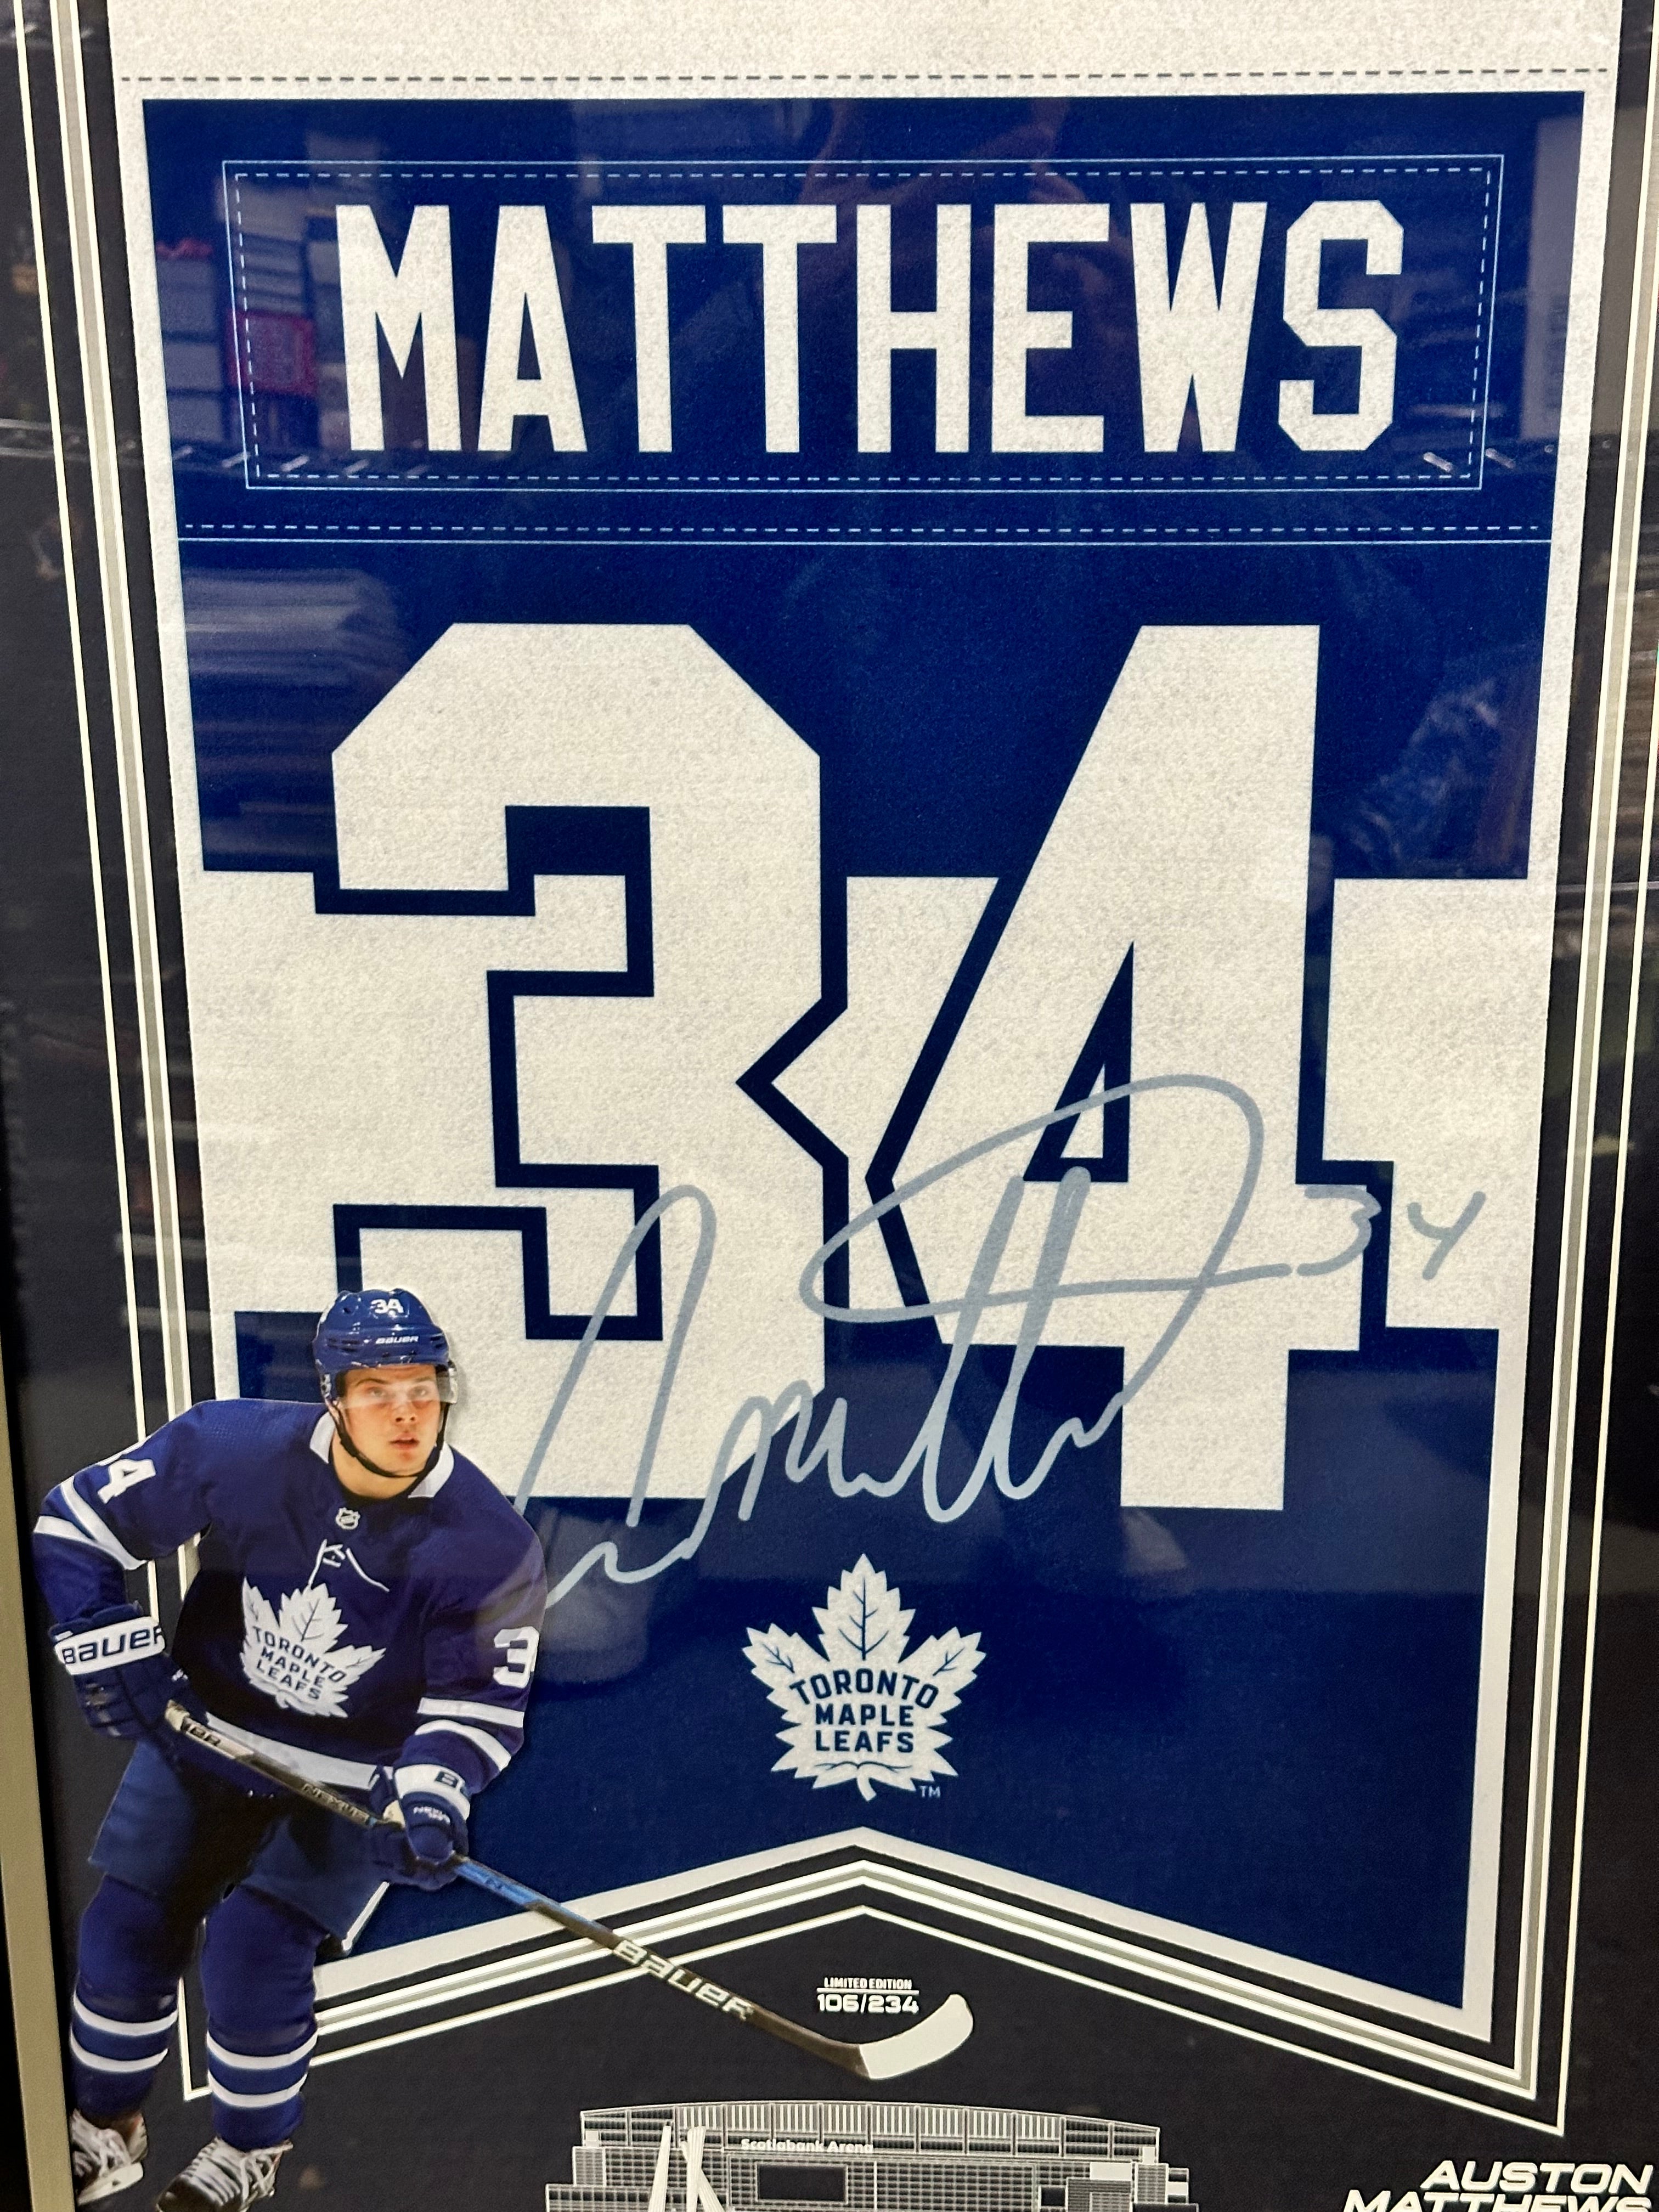 Auston Matthews autographed Toronto Maple Leafs hockey banner framed with COA from Daniel Parry